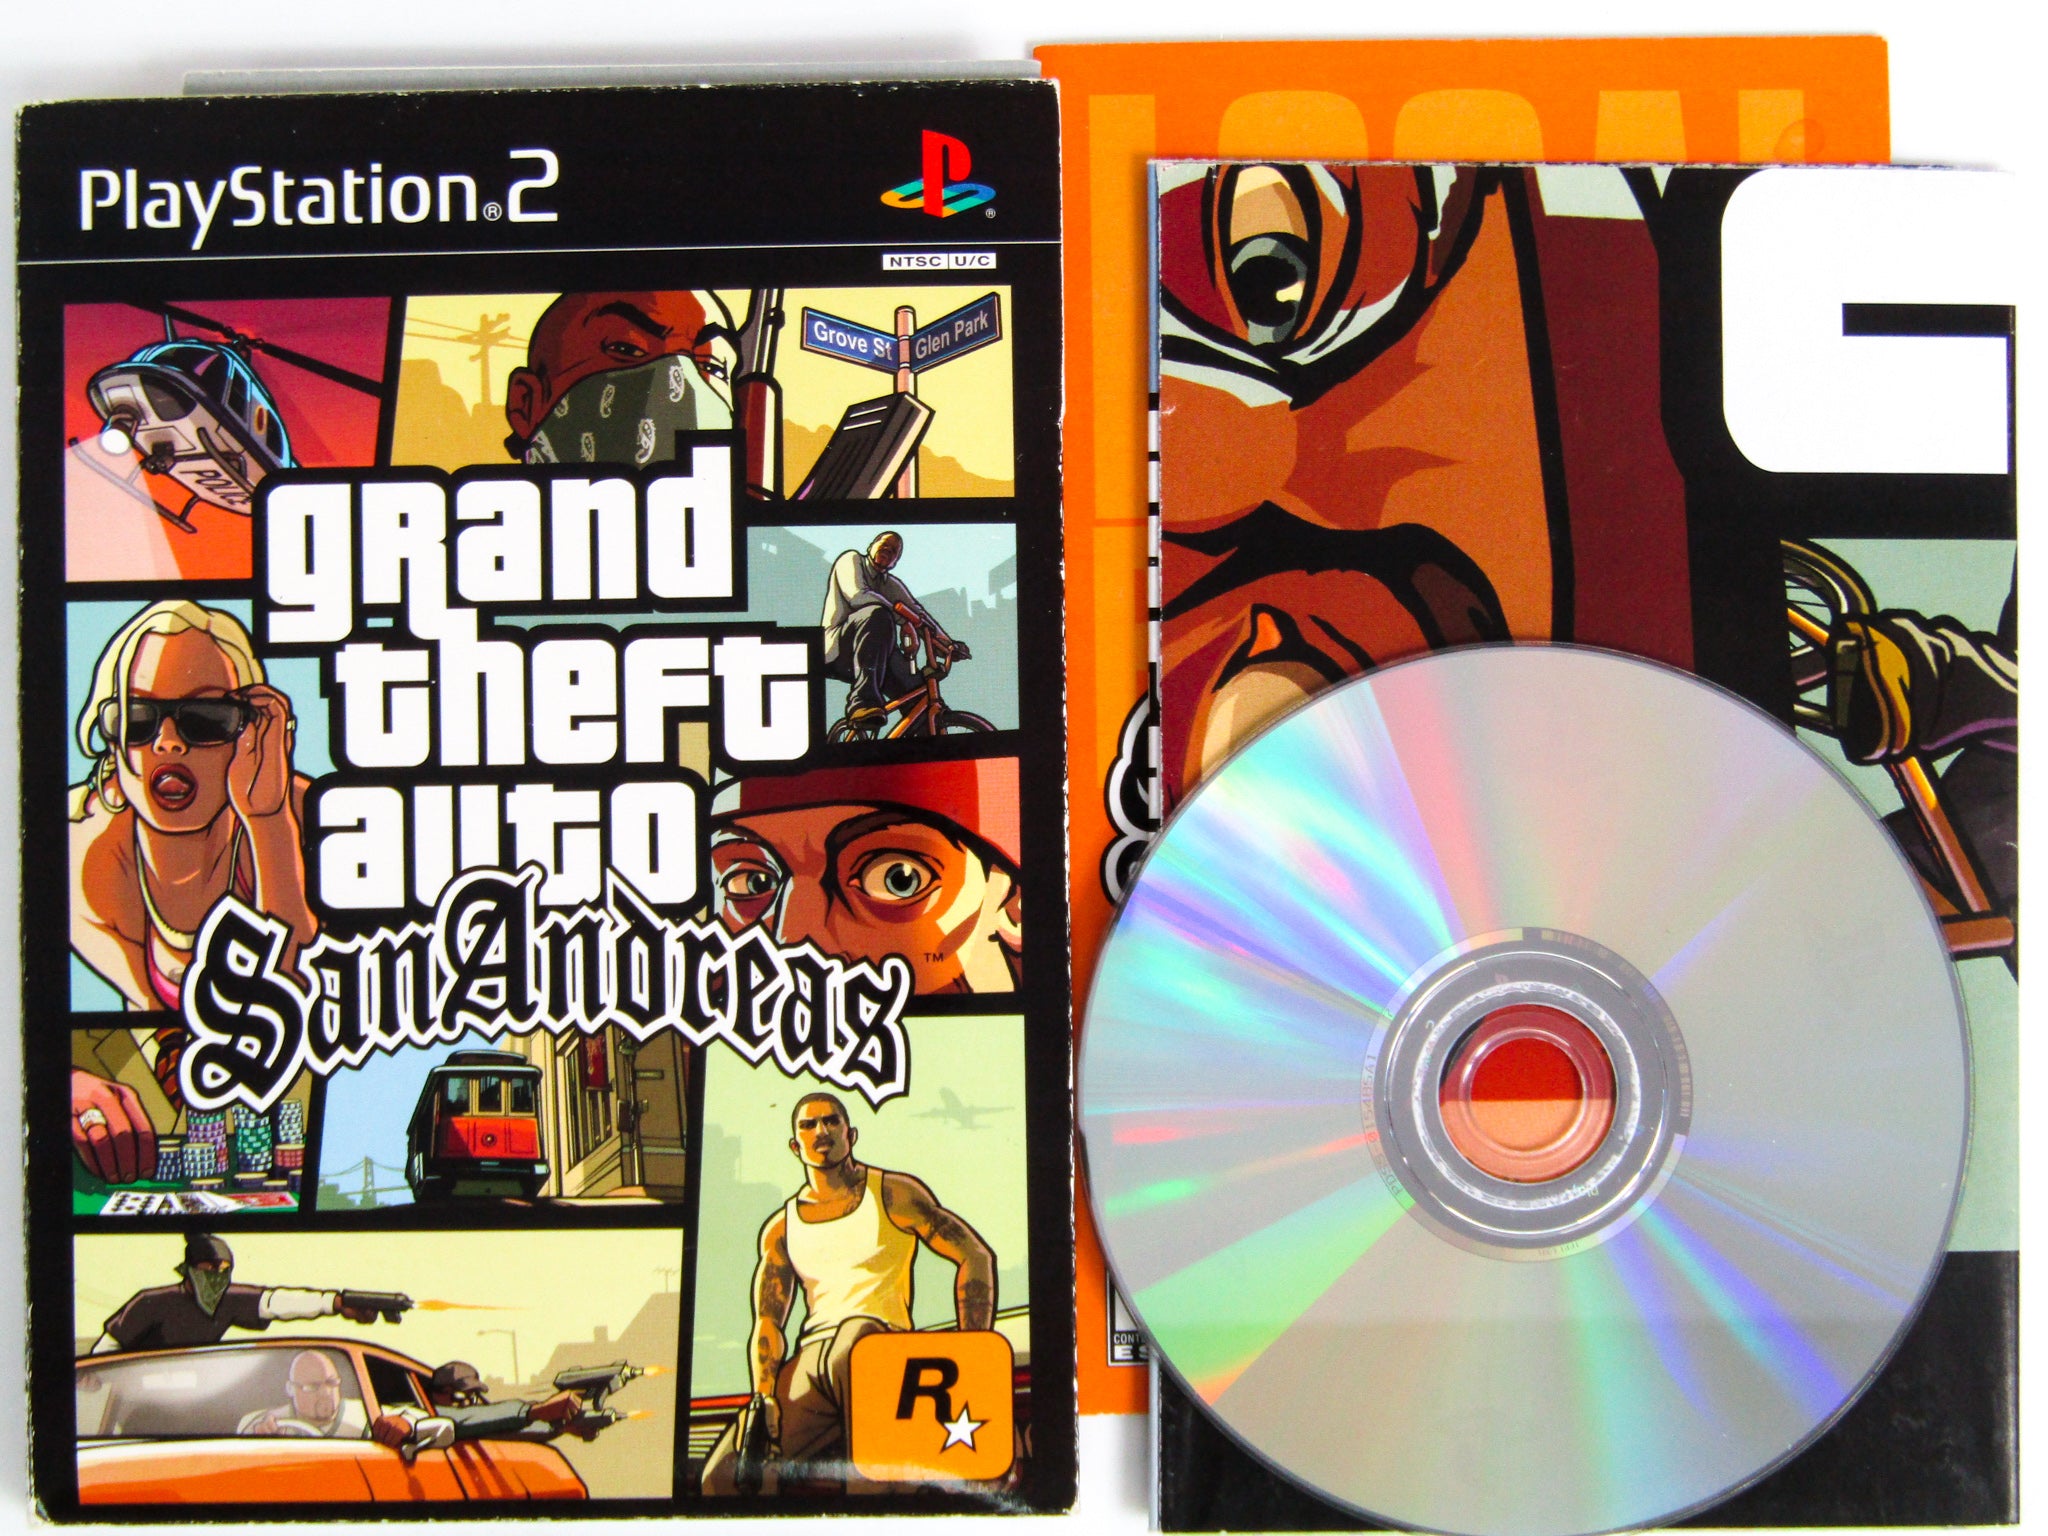 Grand Theft Auto: San Andreas (Special Edition) - PlayStation 2 - GameSpy